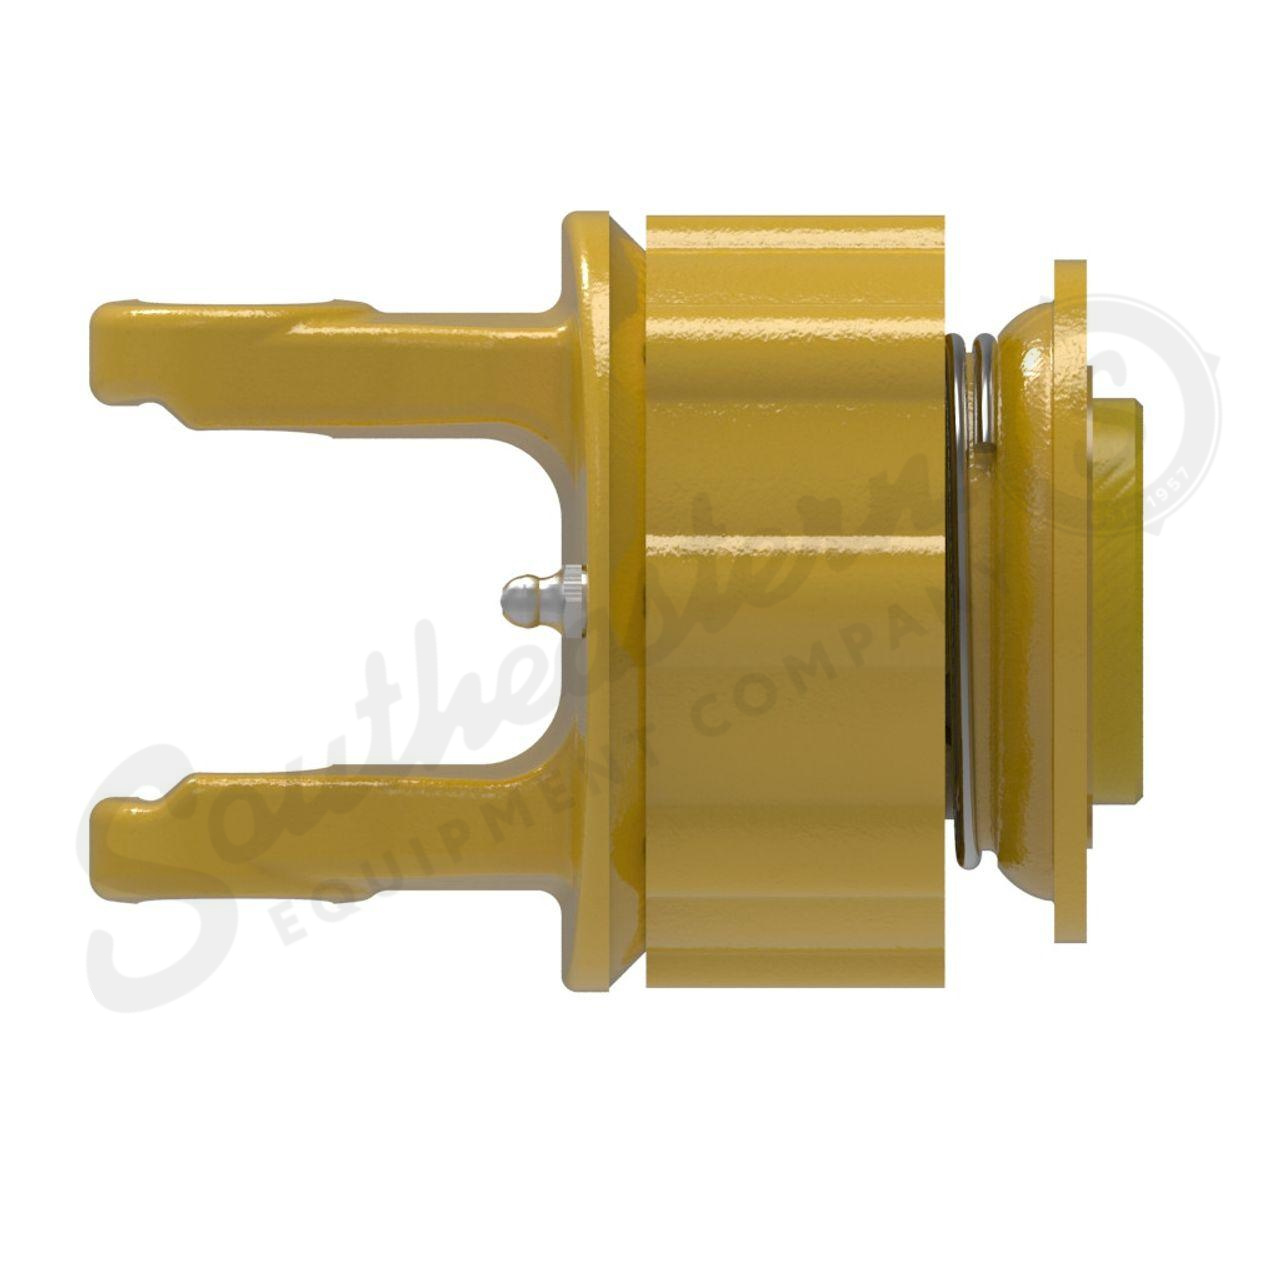 AB2 and AW20 Series Ratchet Clutch Yoke – 1 3/8-6 Spline Bore – Spring-Lok Connection